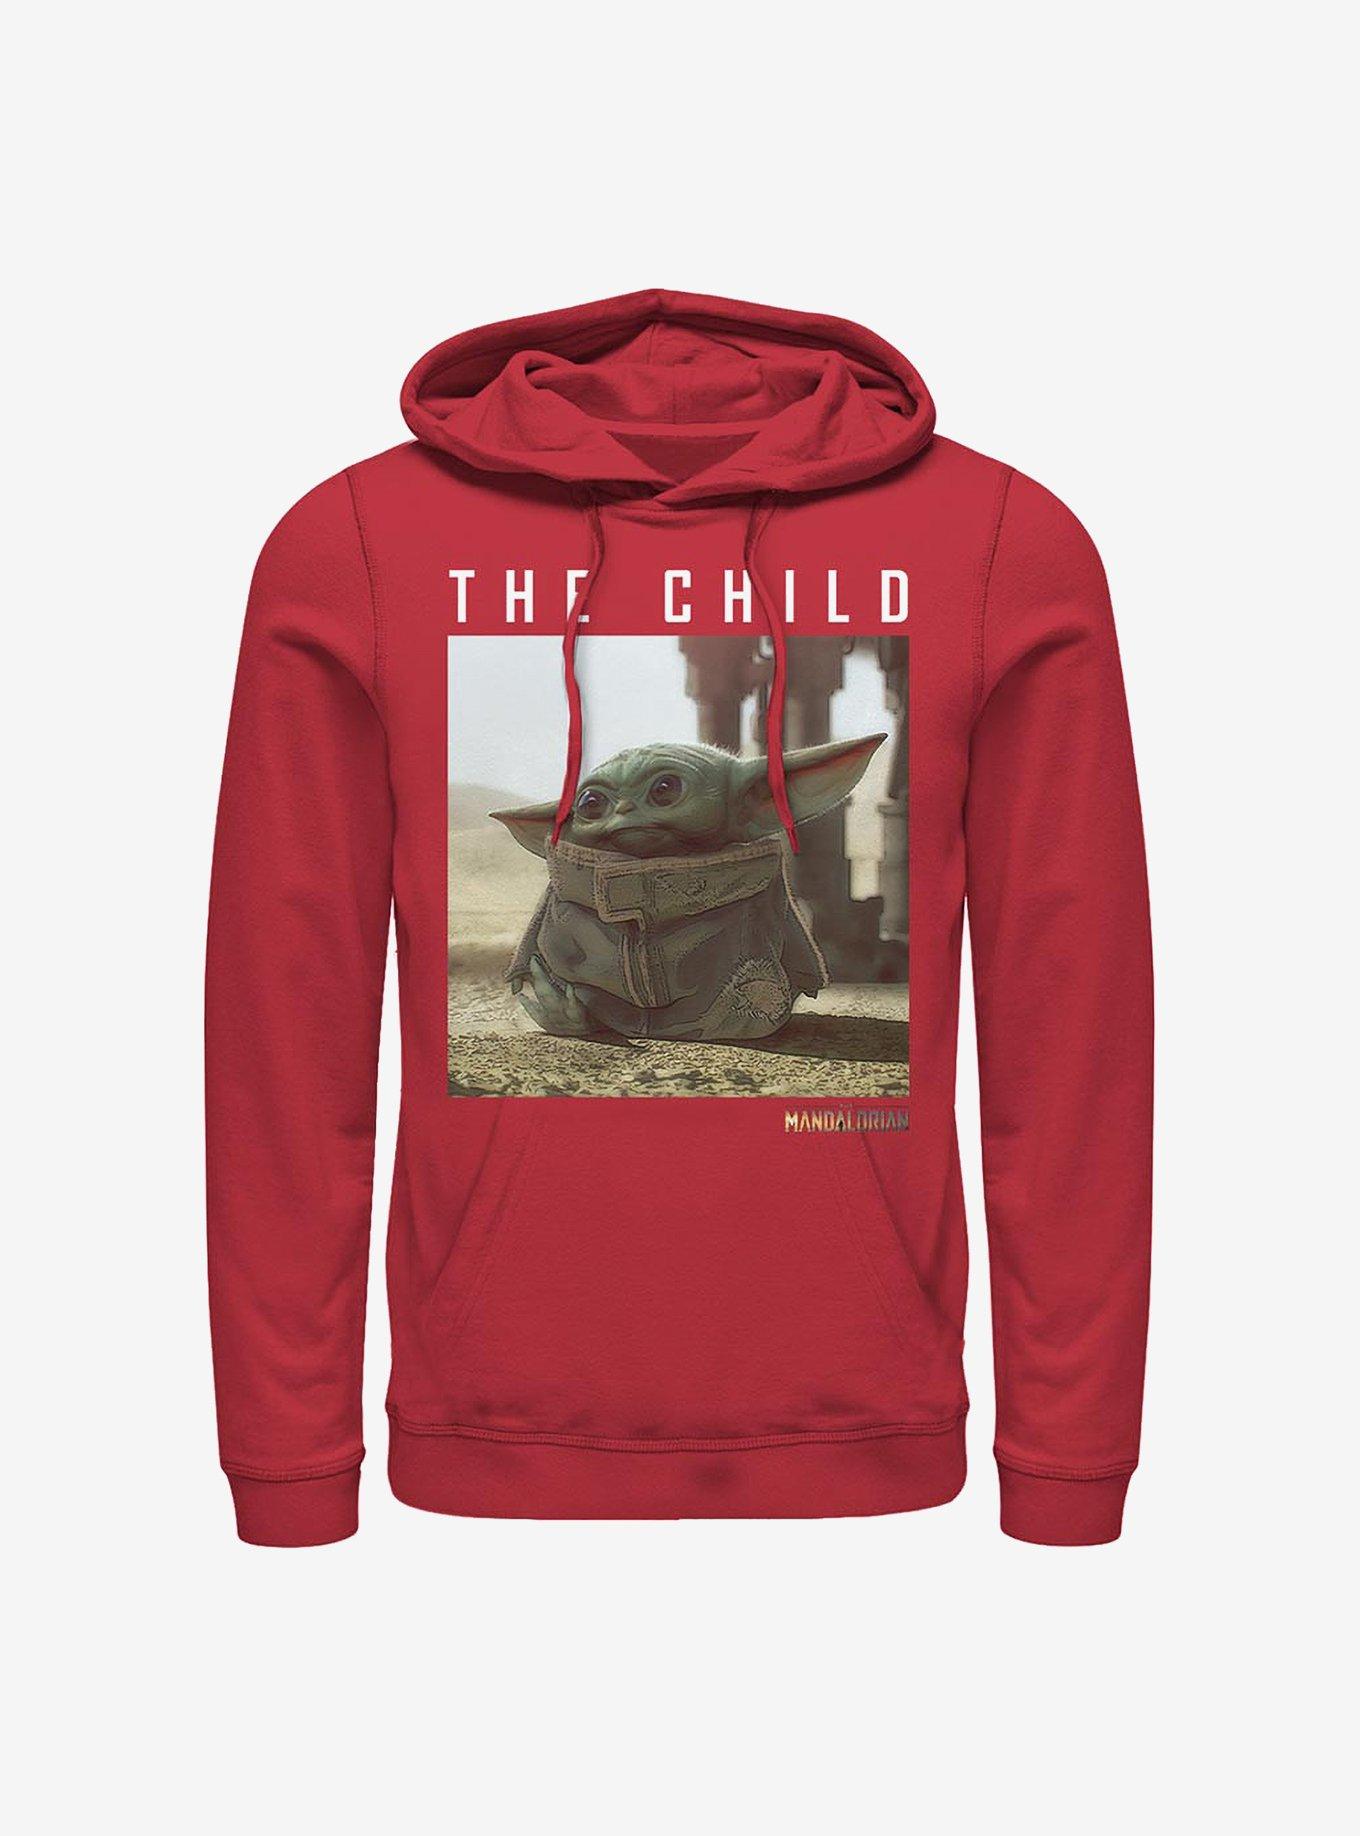 Star Wars The Mandalorian The Child Classic Pose Hoodie, RED, hi-res